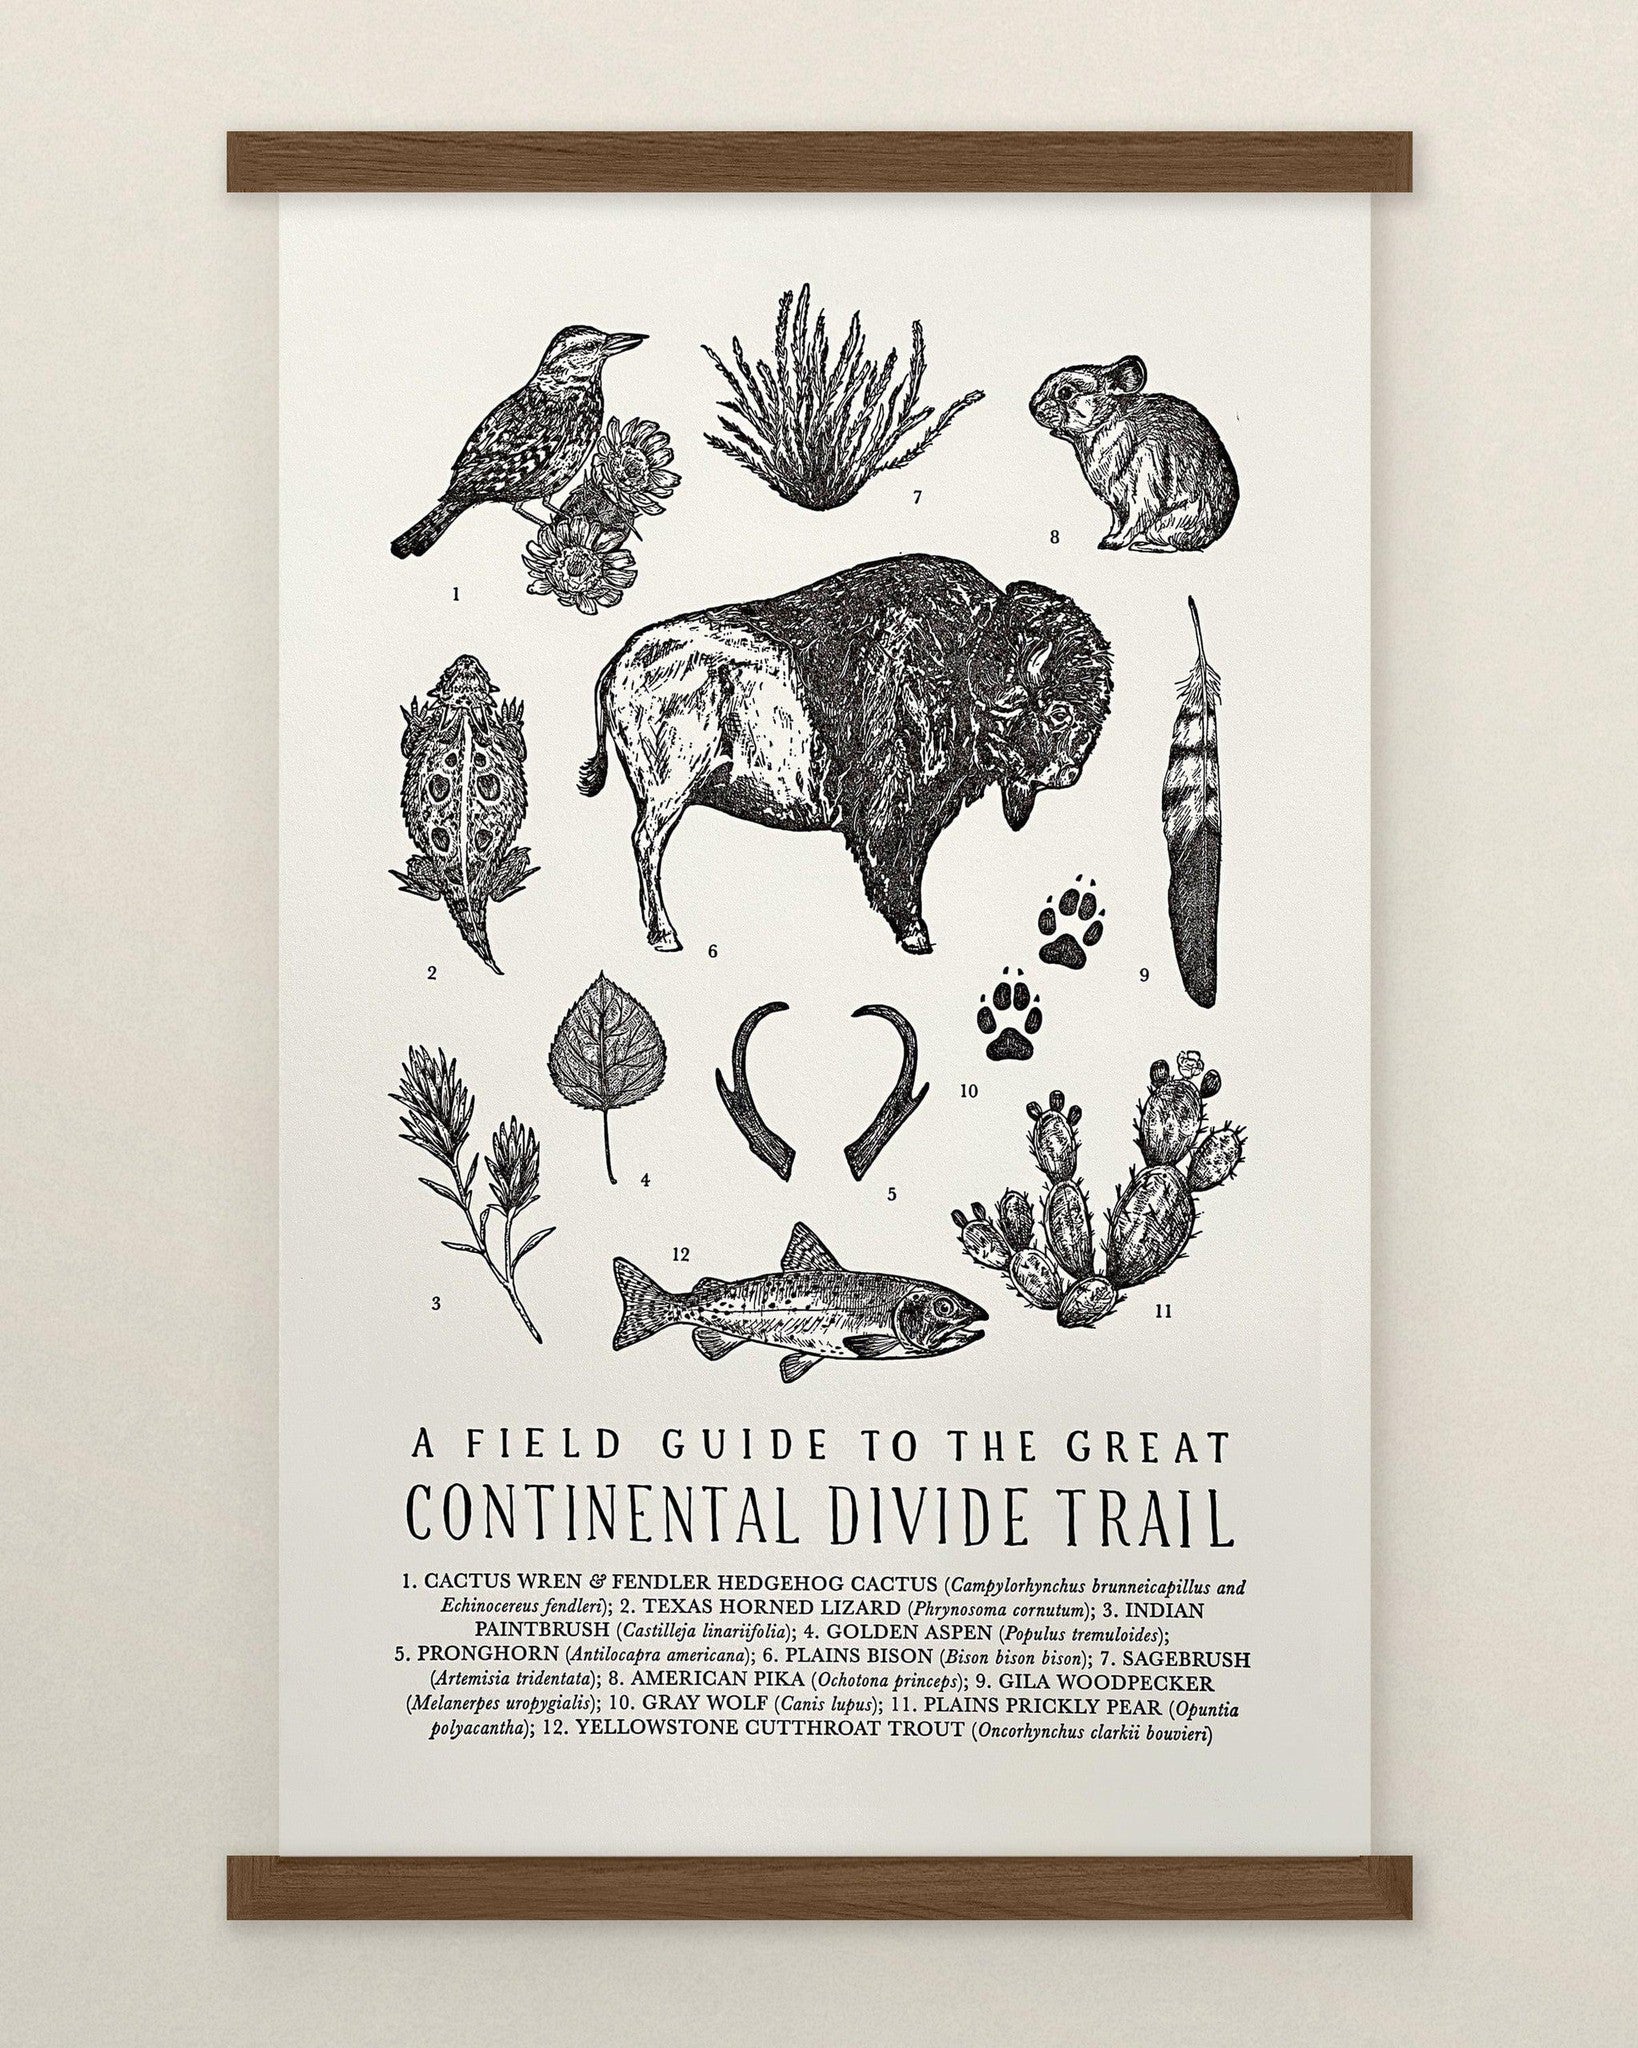 A Continental Divide Trail Field Guide Letterpress Print of the great Oklahoma bison trail by The Wild Wander.